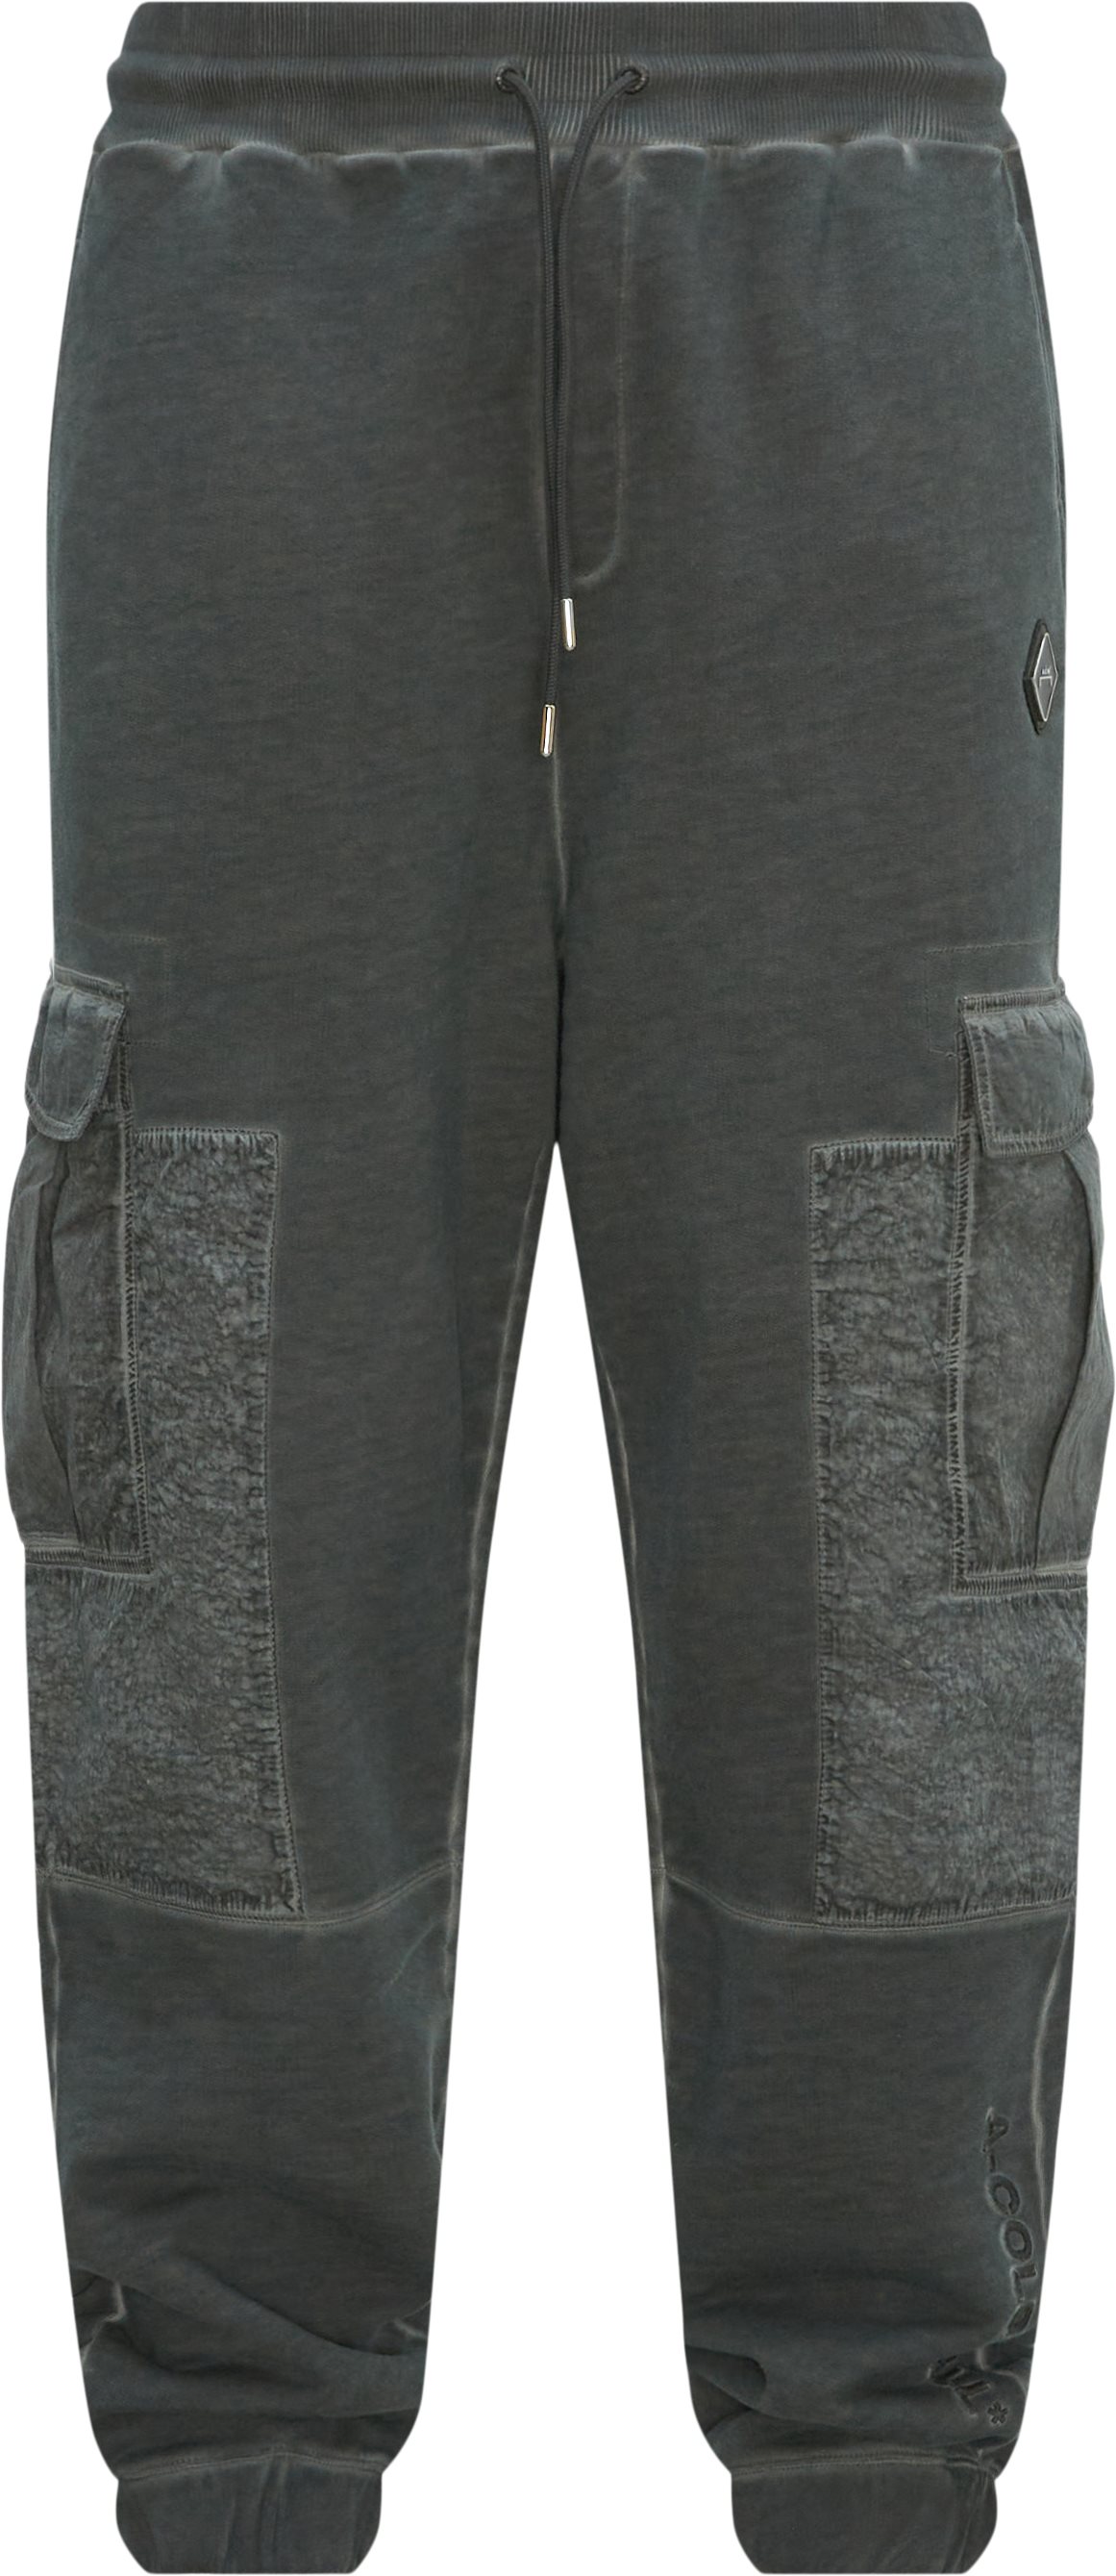 A-COLD-WALL* Trousers ACWMB214 ASH CONTRAST SWEAT P Grey